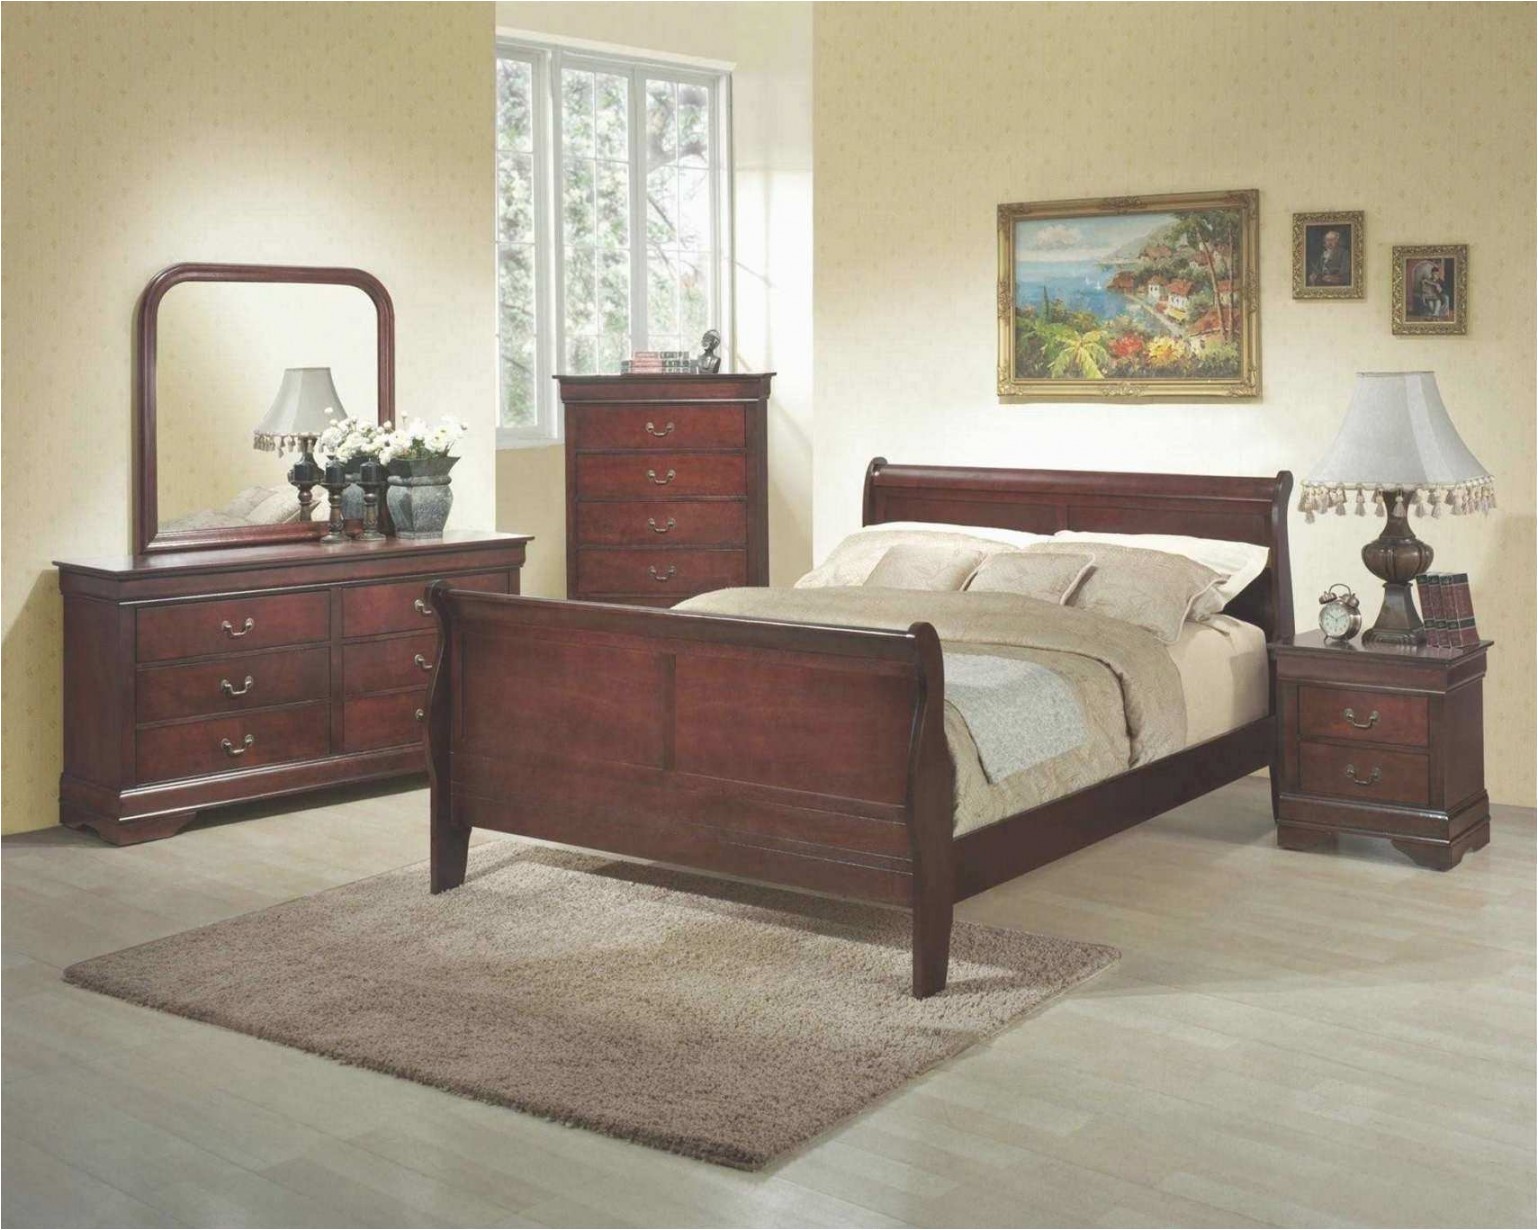 discontinued thomasville bedroom furniture